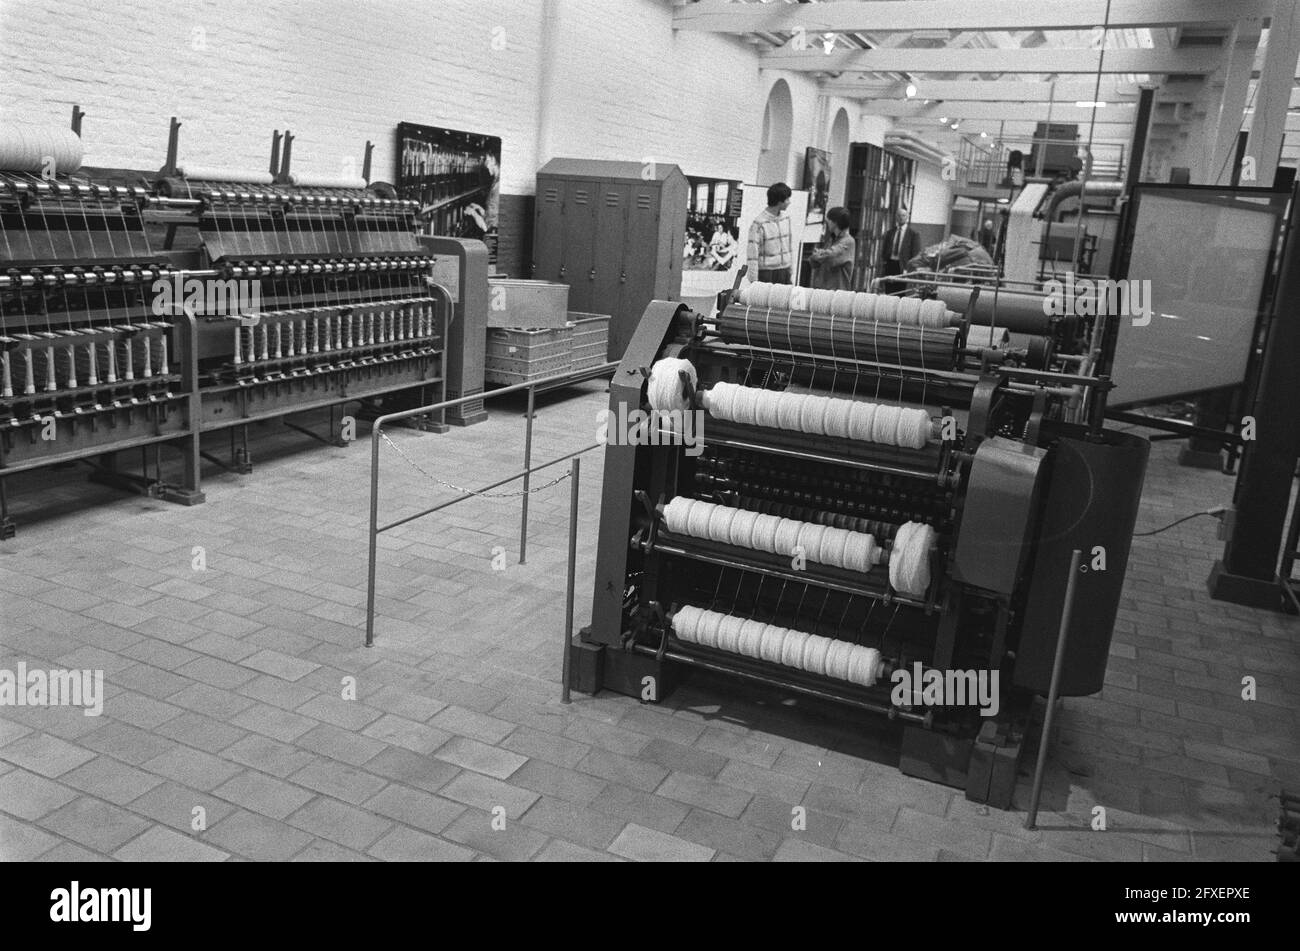 [Textielmuseum Tilburg] Interior, March 18, 1986, museums, weaving mills, The Netherlands, 20th century press agency photo, news to remember, documentary, historic photography 1945-1990, visual stories, human history of the Twentieth Century, capturing moments in time Stock Photo